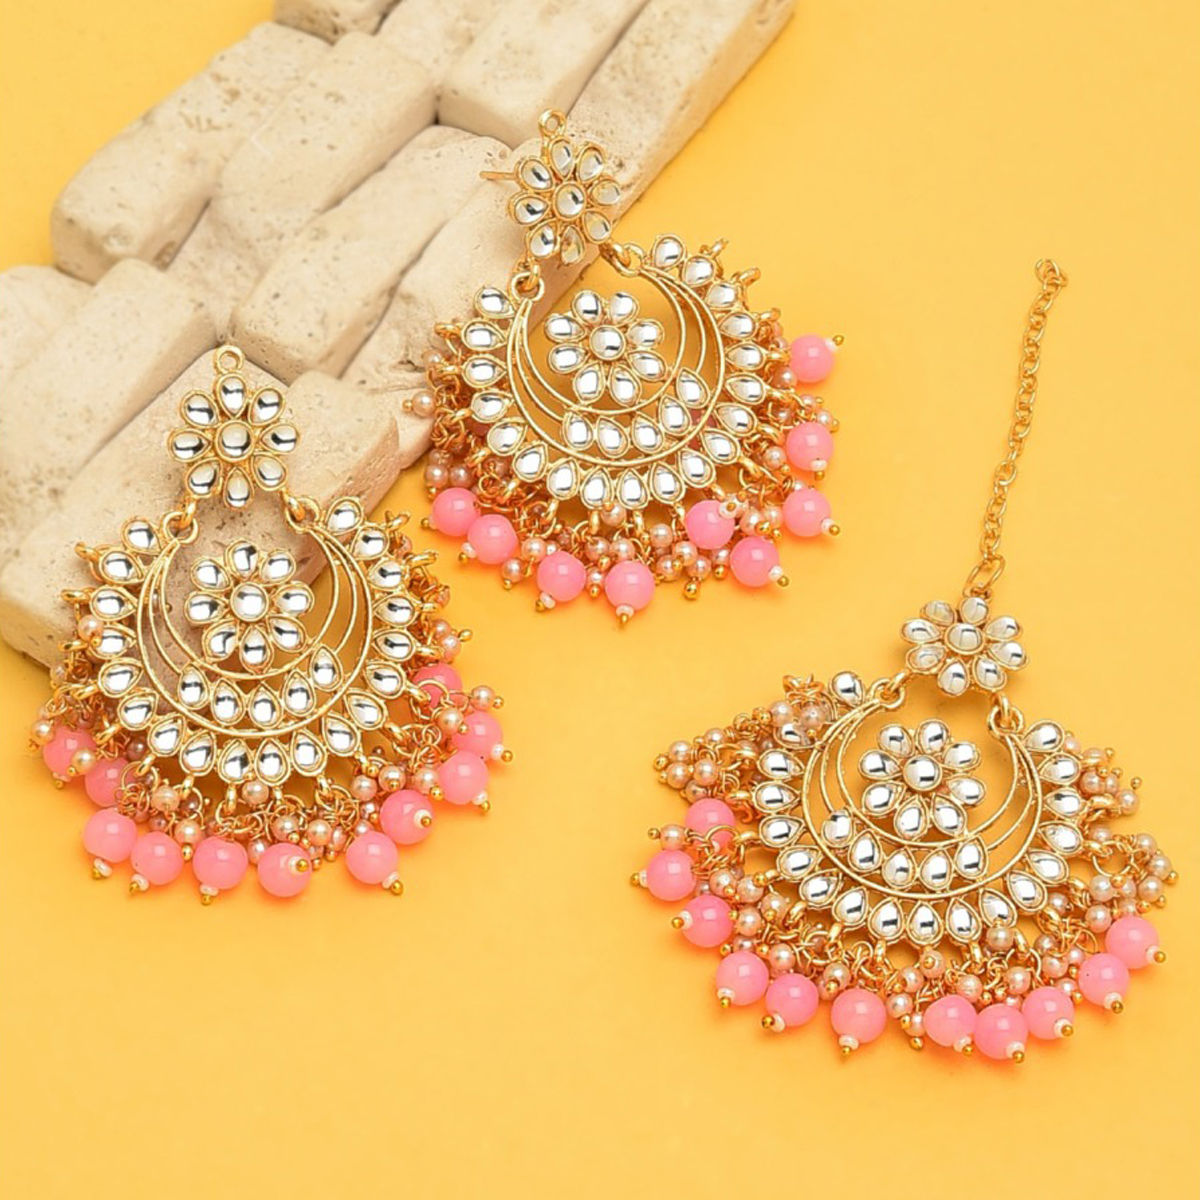 Peach Wedding Earrings Online Shopping for Women at Low Prices